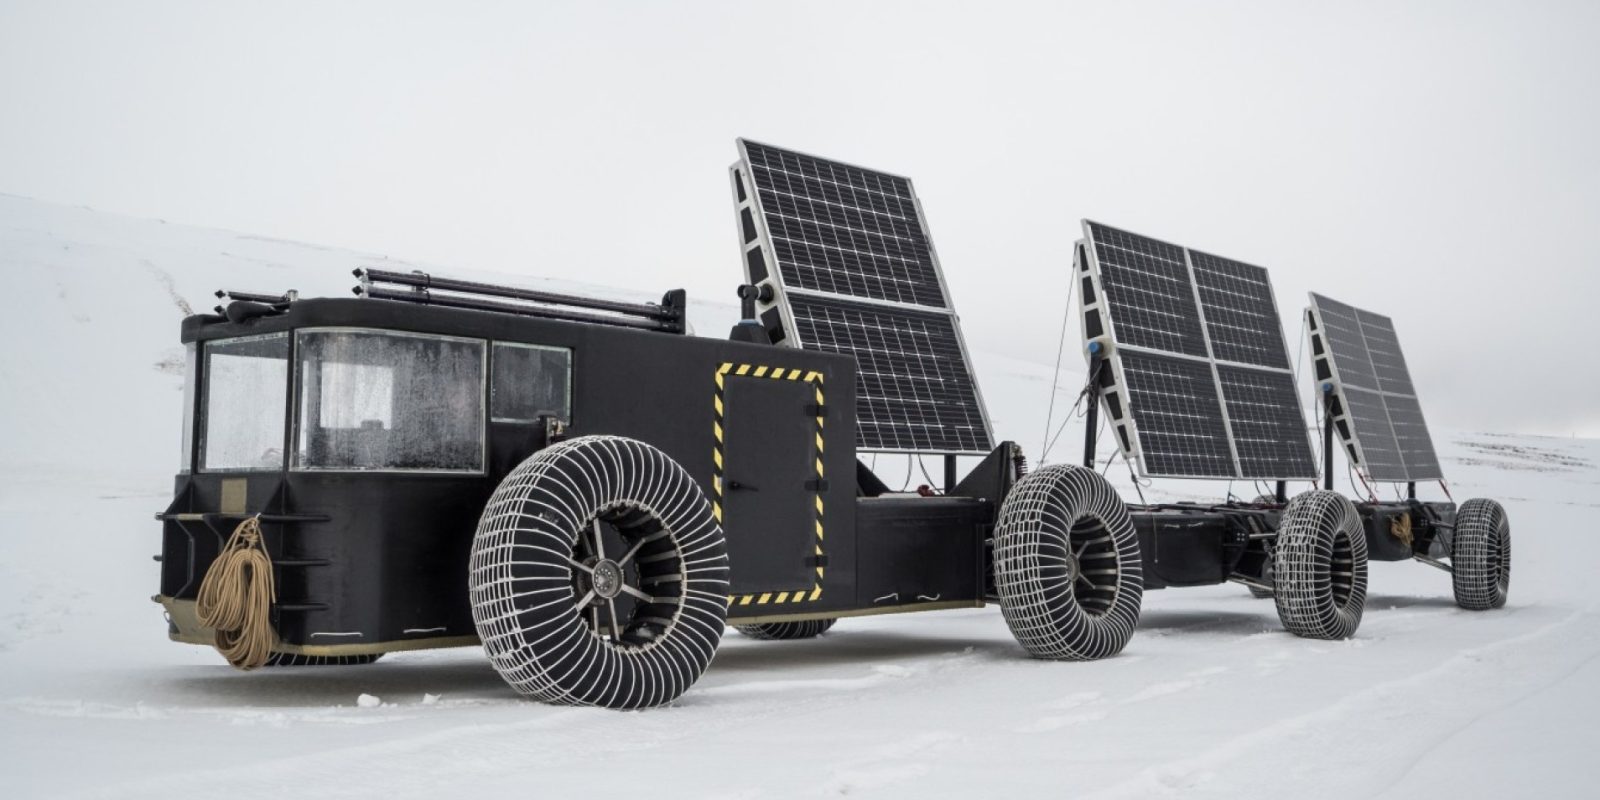 Solar Voyager electric buggy will drive 2 people to the South Pole and back